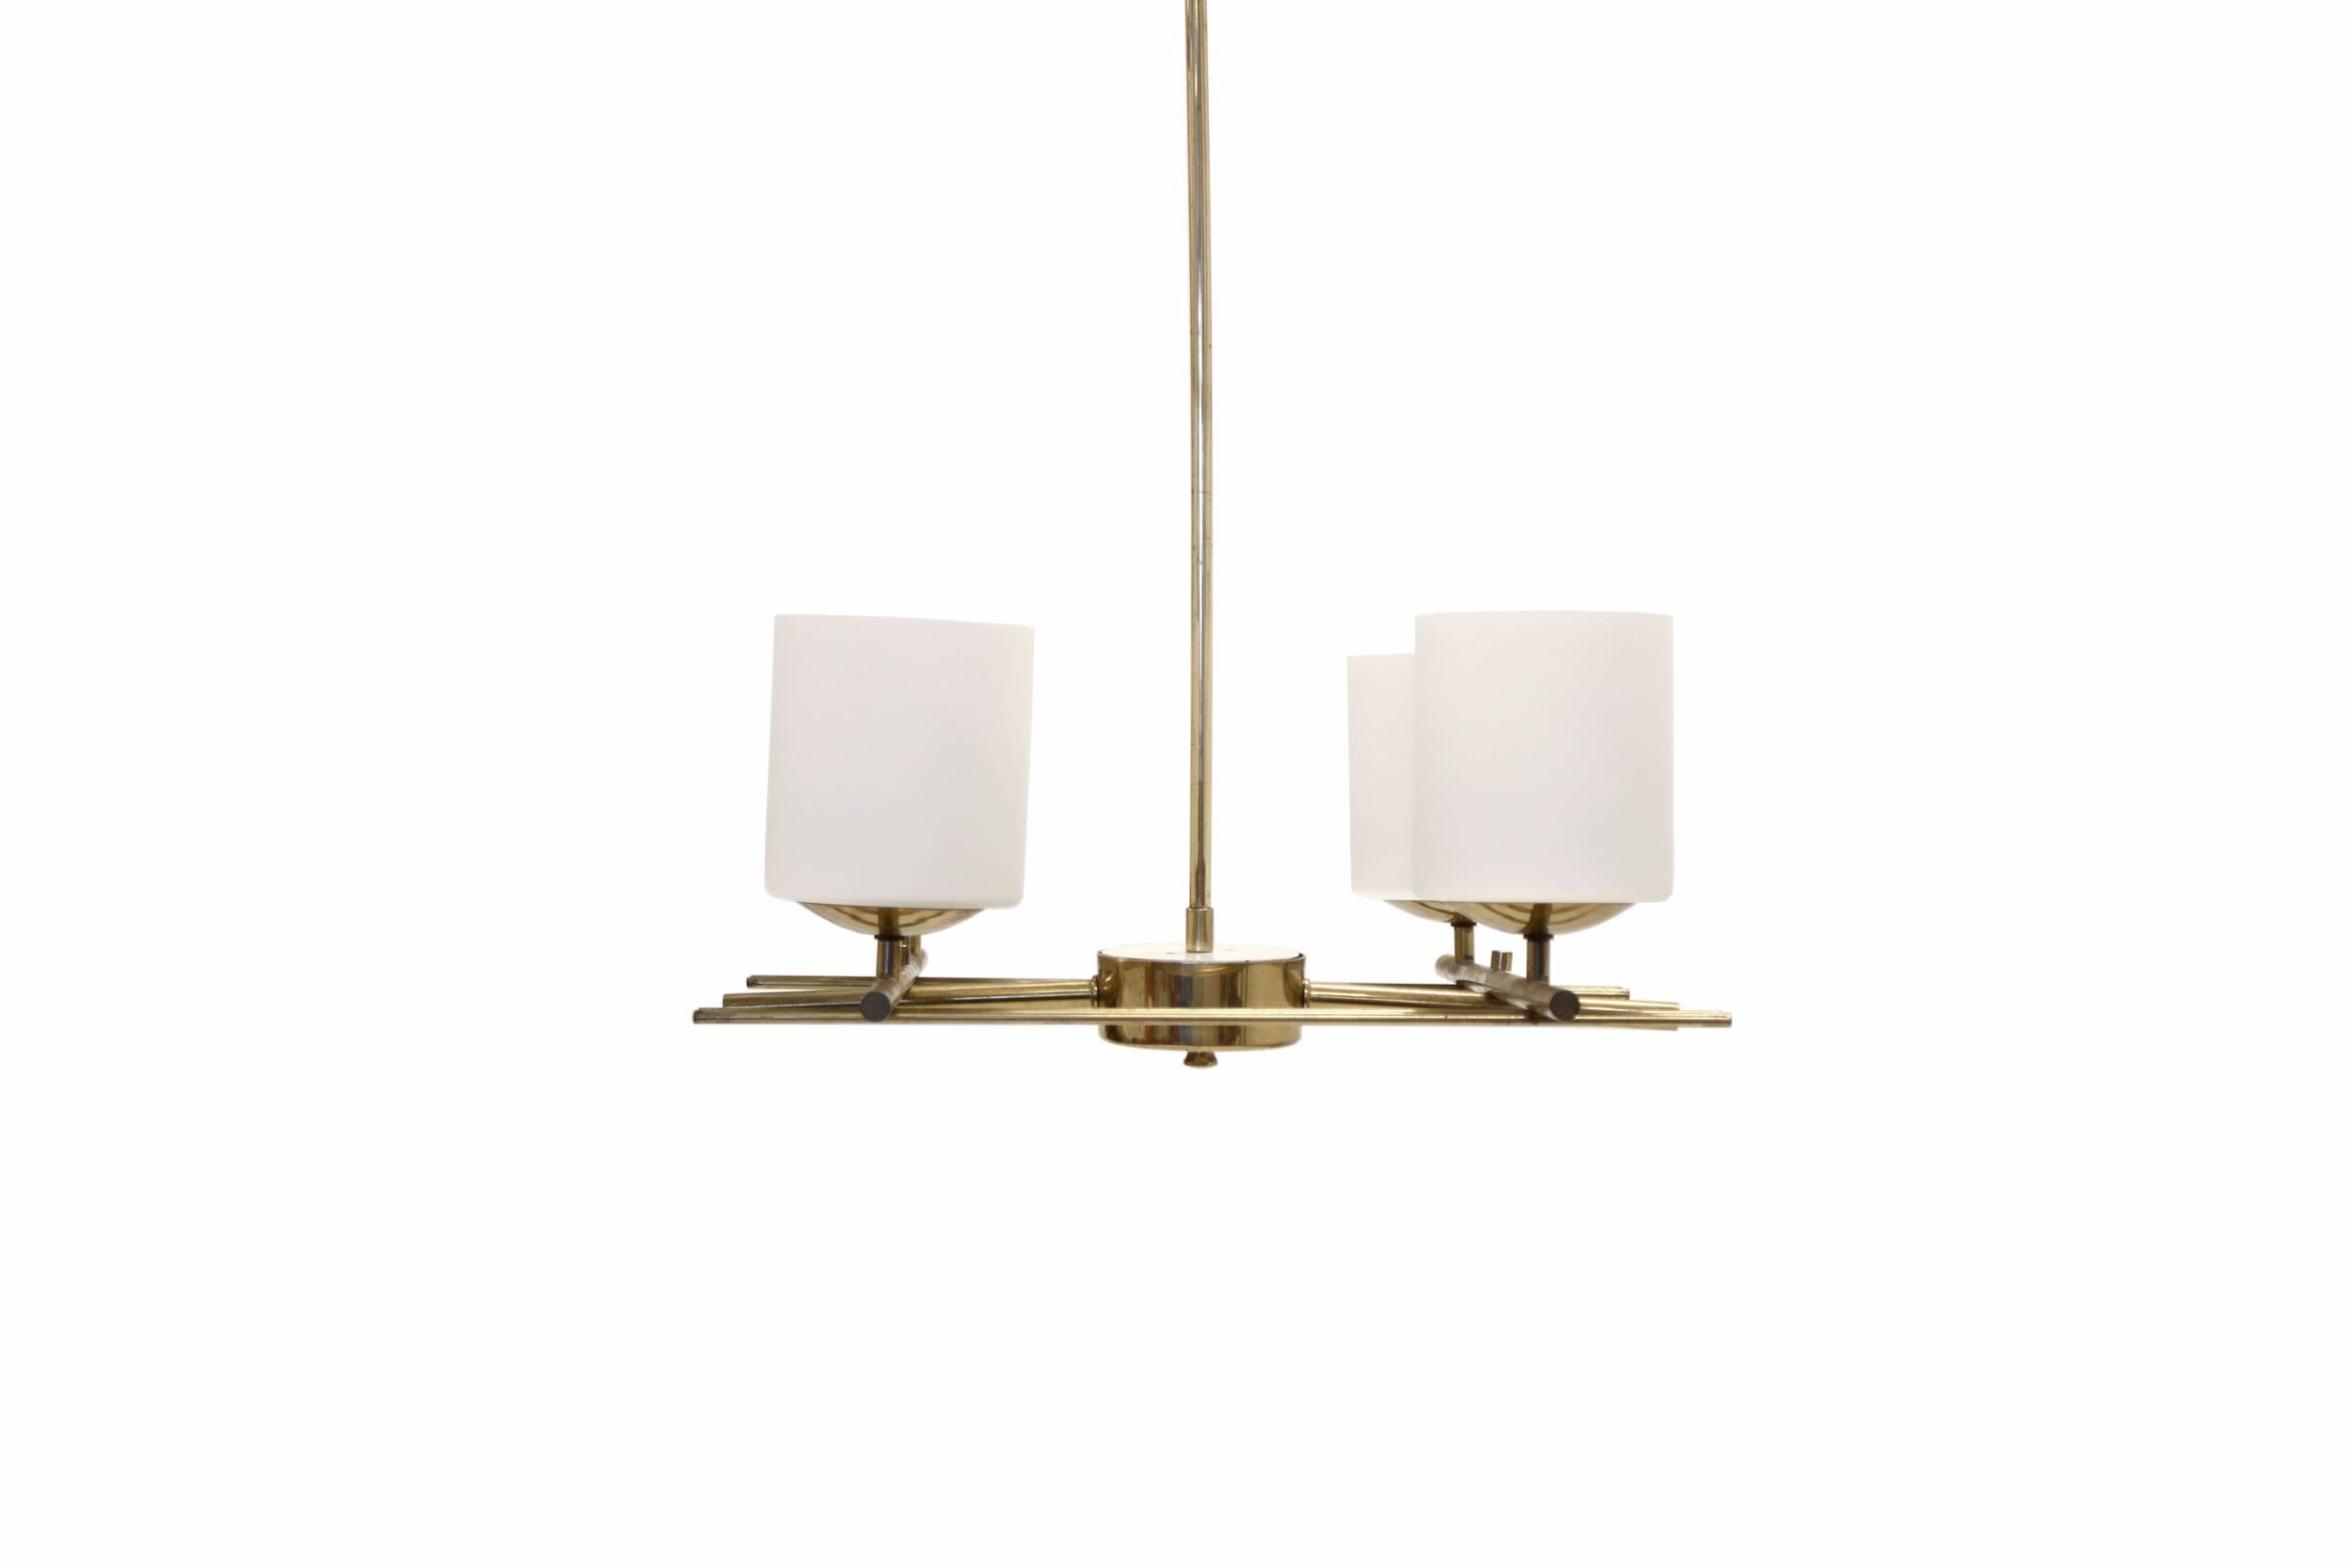 Modernist and visually striking four-armed chandelier in brass and opaline glass. Designed and manufactured in Finland by Itsu. The lamp is fully working and in very good vintage condition.